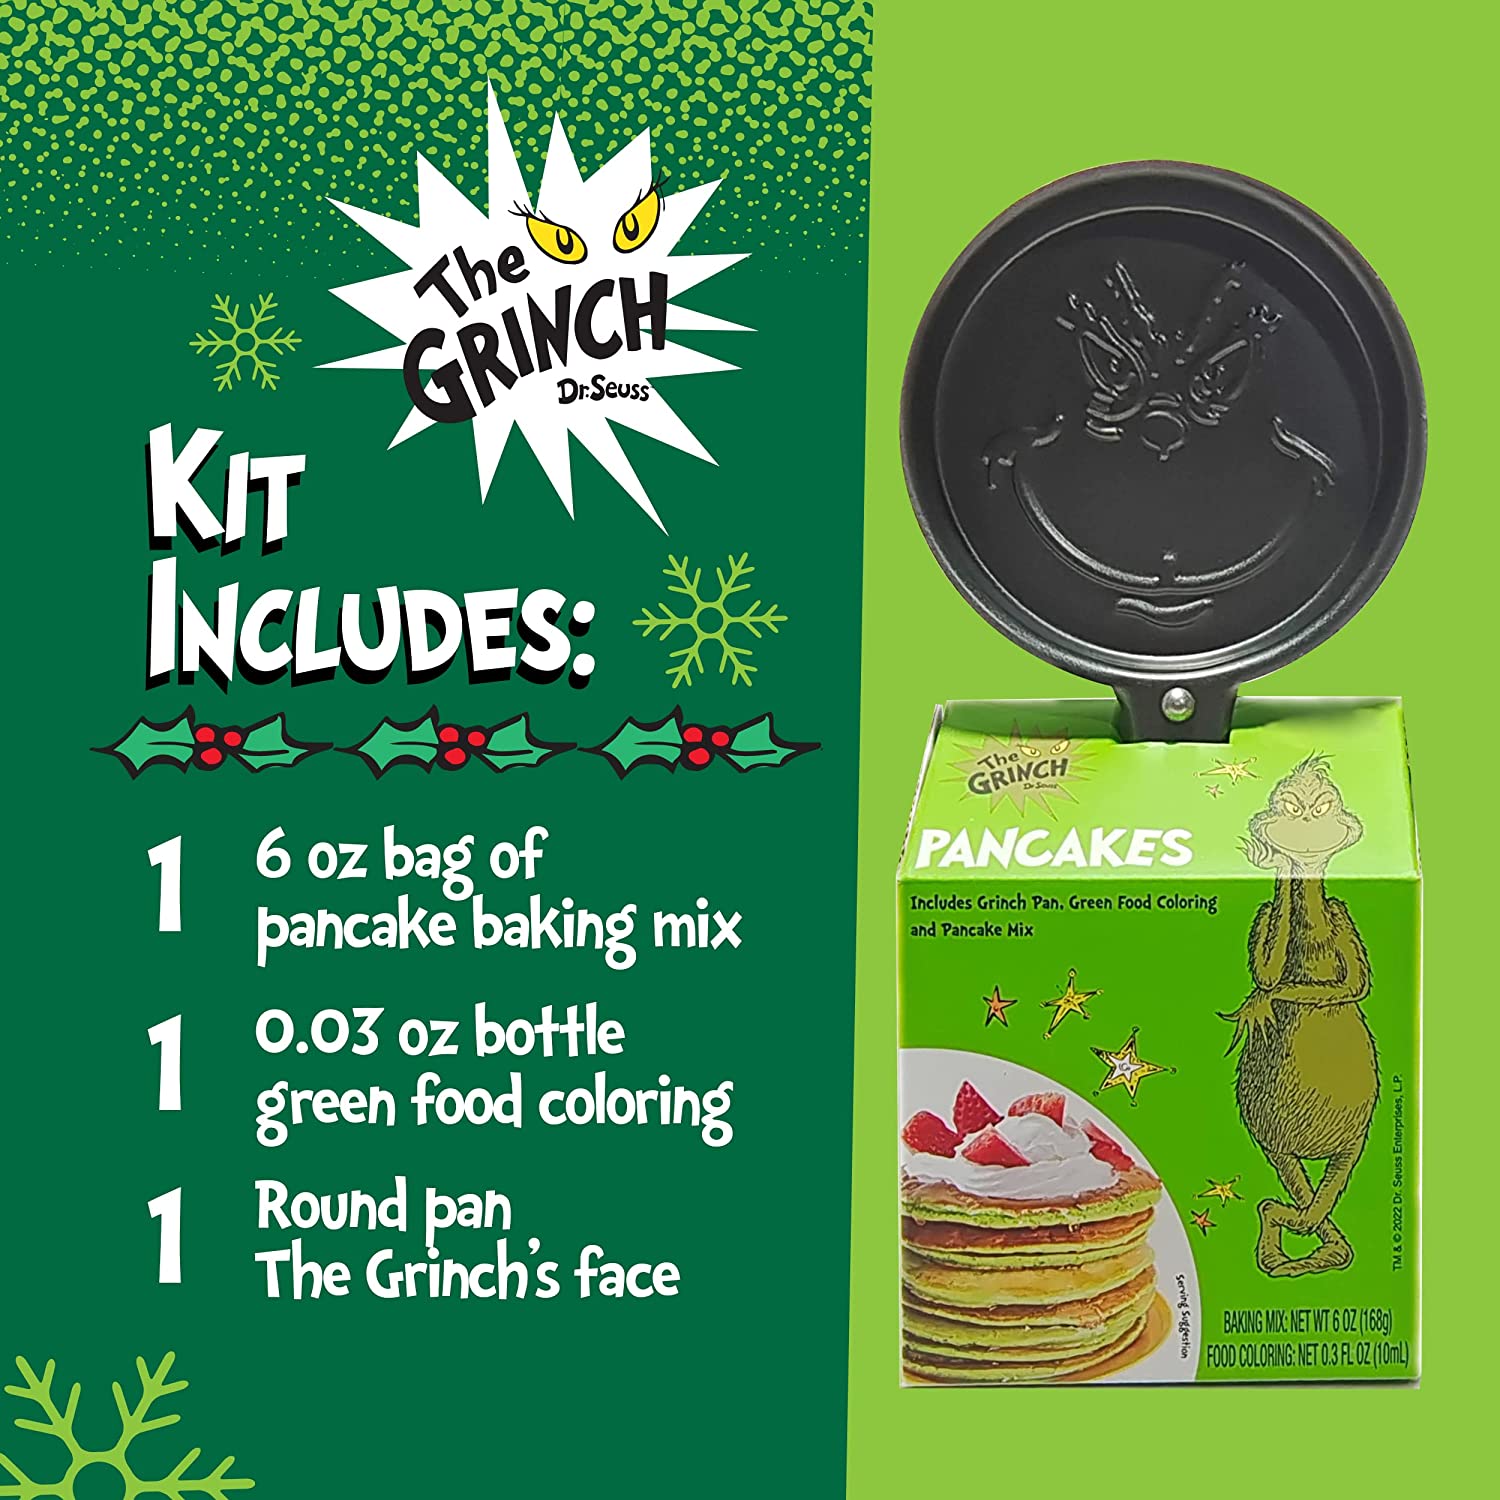 Grinch Pancakes • The Diary of a Real Housewife